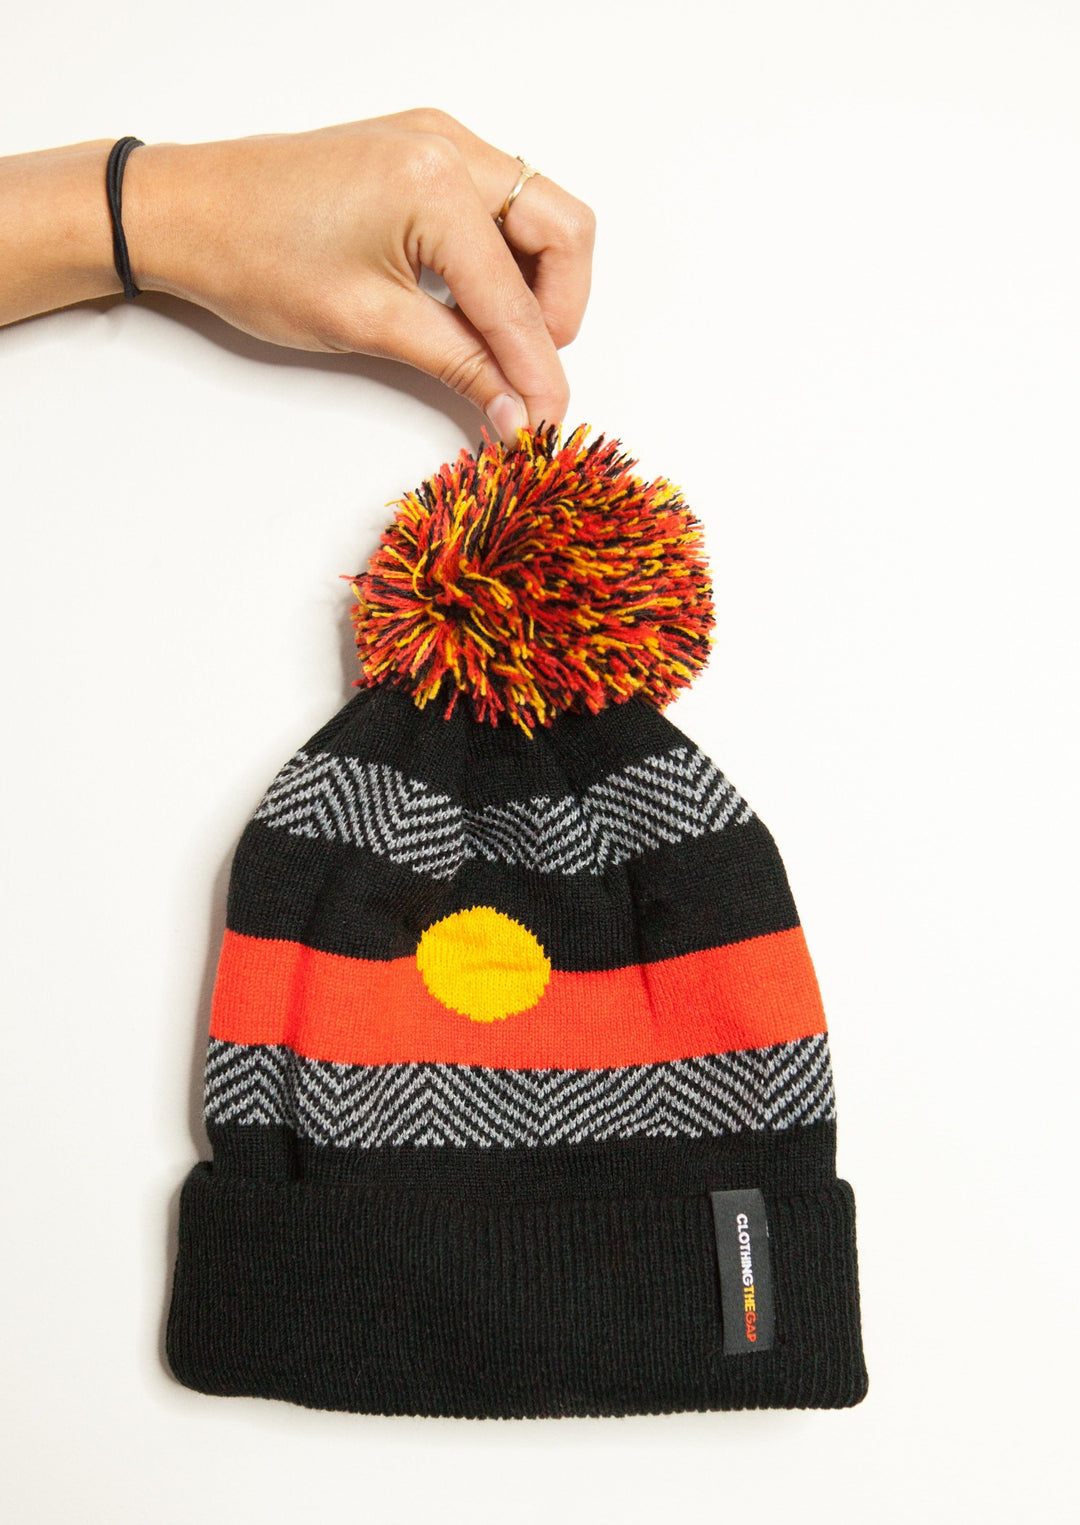 Clothing the Gaps. Beanie with Aboriginal flags on both sides and contrasting black and dark grey line work and red, black and yellow pom pom on top.